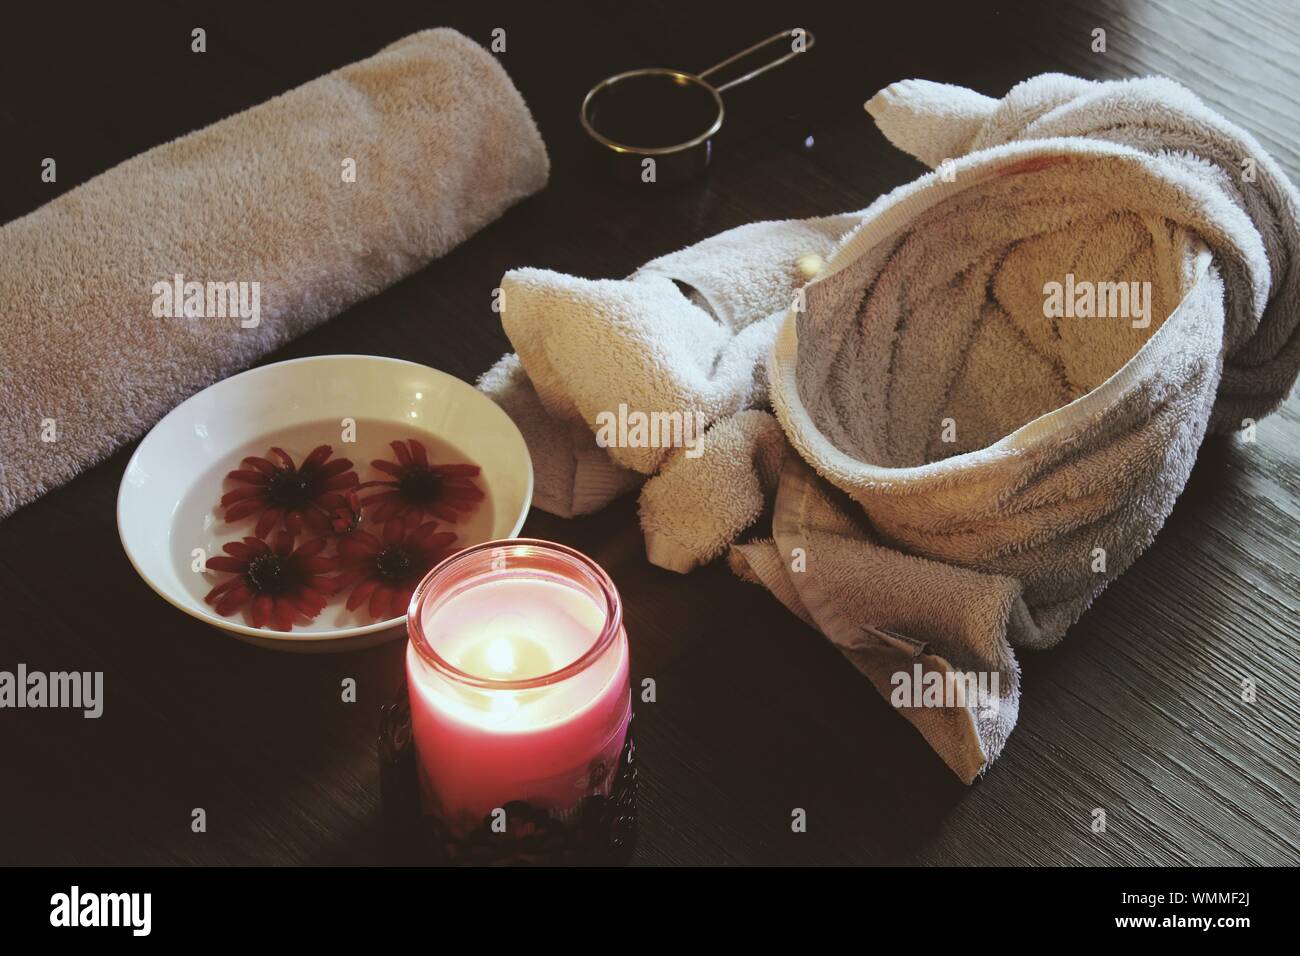 High Angle View Of Products For Spa Treatment On Table Stock Photo